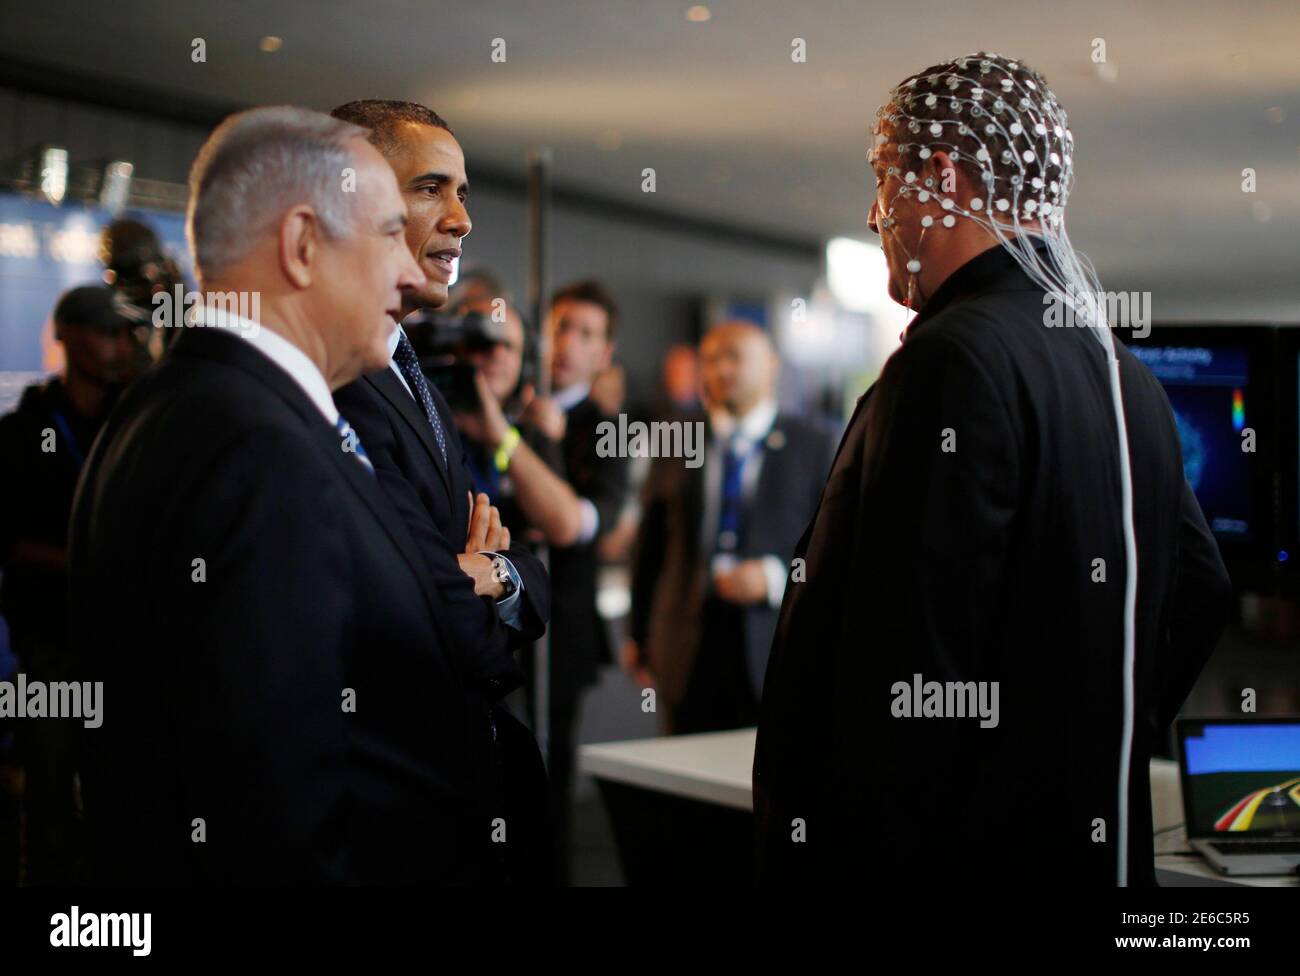 U.S. President Barack Obama and Israeli Prime Minister Benjamin Netanyahu speak with Professor Amir Geva, head of the biomedical signal processing and pattern recognition lab at the Ben-Gurion University of the Negev, as they tour a technology expo at the Israel Museum in Jerusalem March 21, 2013.   REUTERS/Jason Reed   (JERUSALEM - Tags: POLITICS) Stock Photo